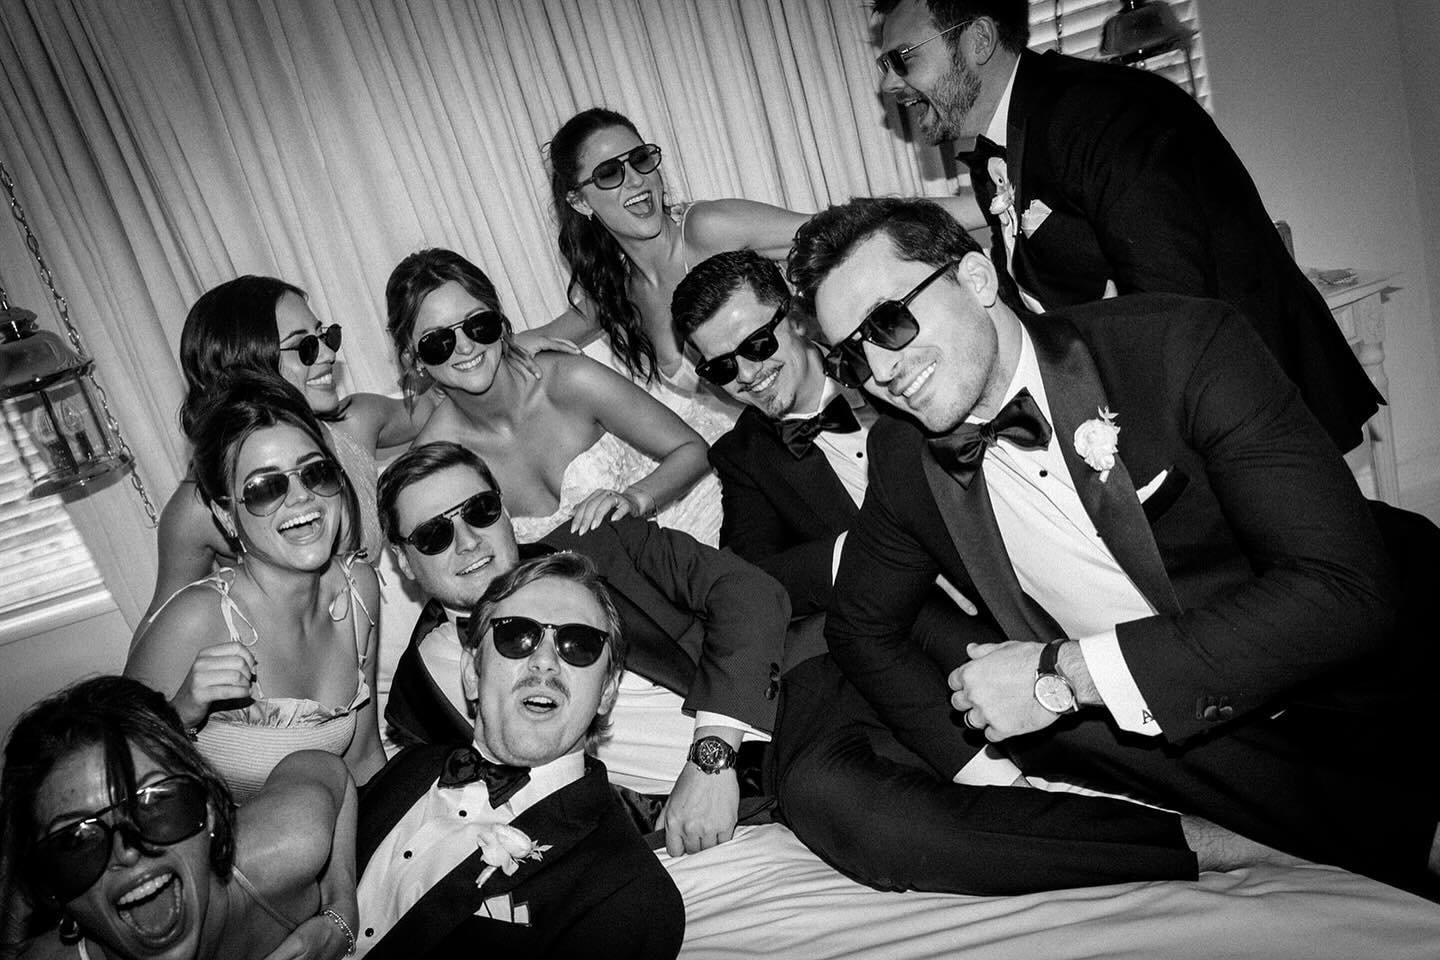 The vibes coming from this group right here were infectious! It&rsquo;s hard not to love a wedding party this cool! 😎.
.
.
.
.
Planning &amp; Design @michellegaribayevents
Venue @avalonhotels
Photography @brogenjessup
Floral Design @luna_design_stud